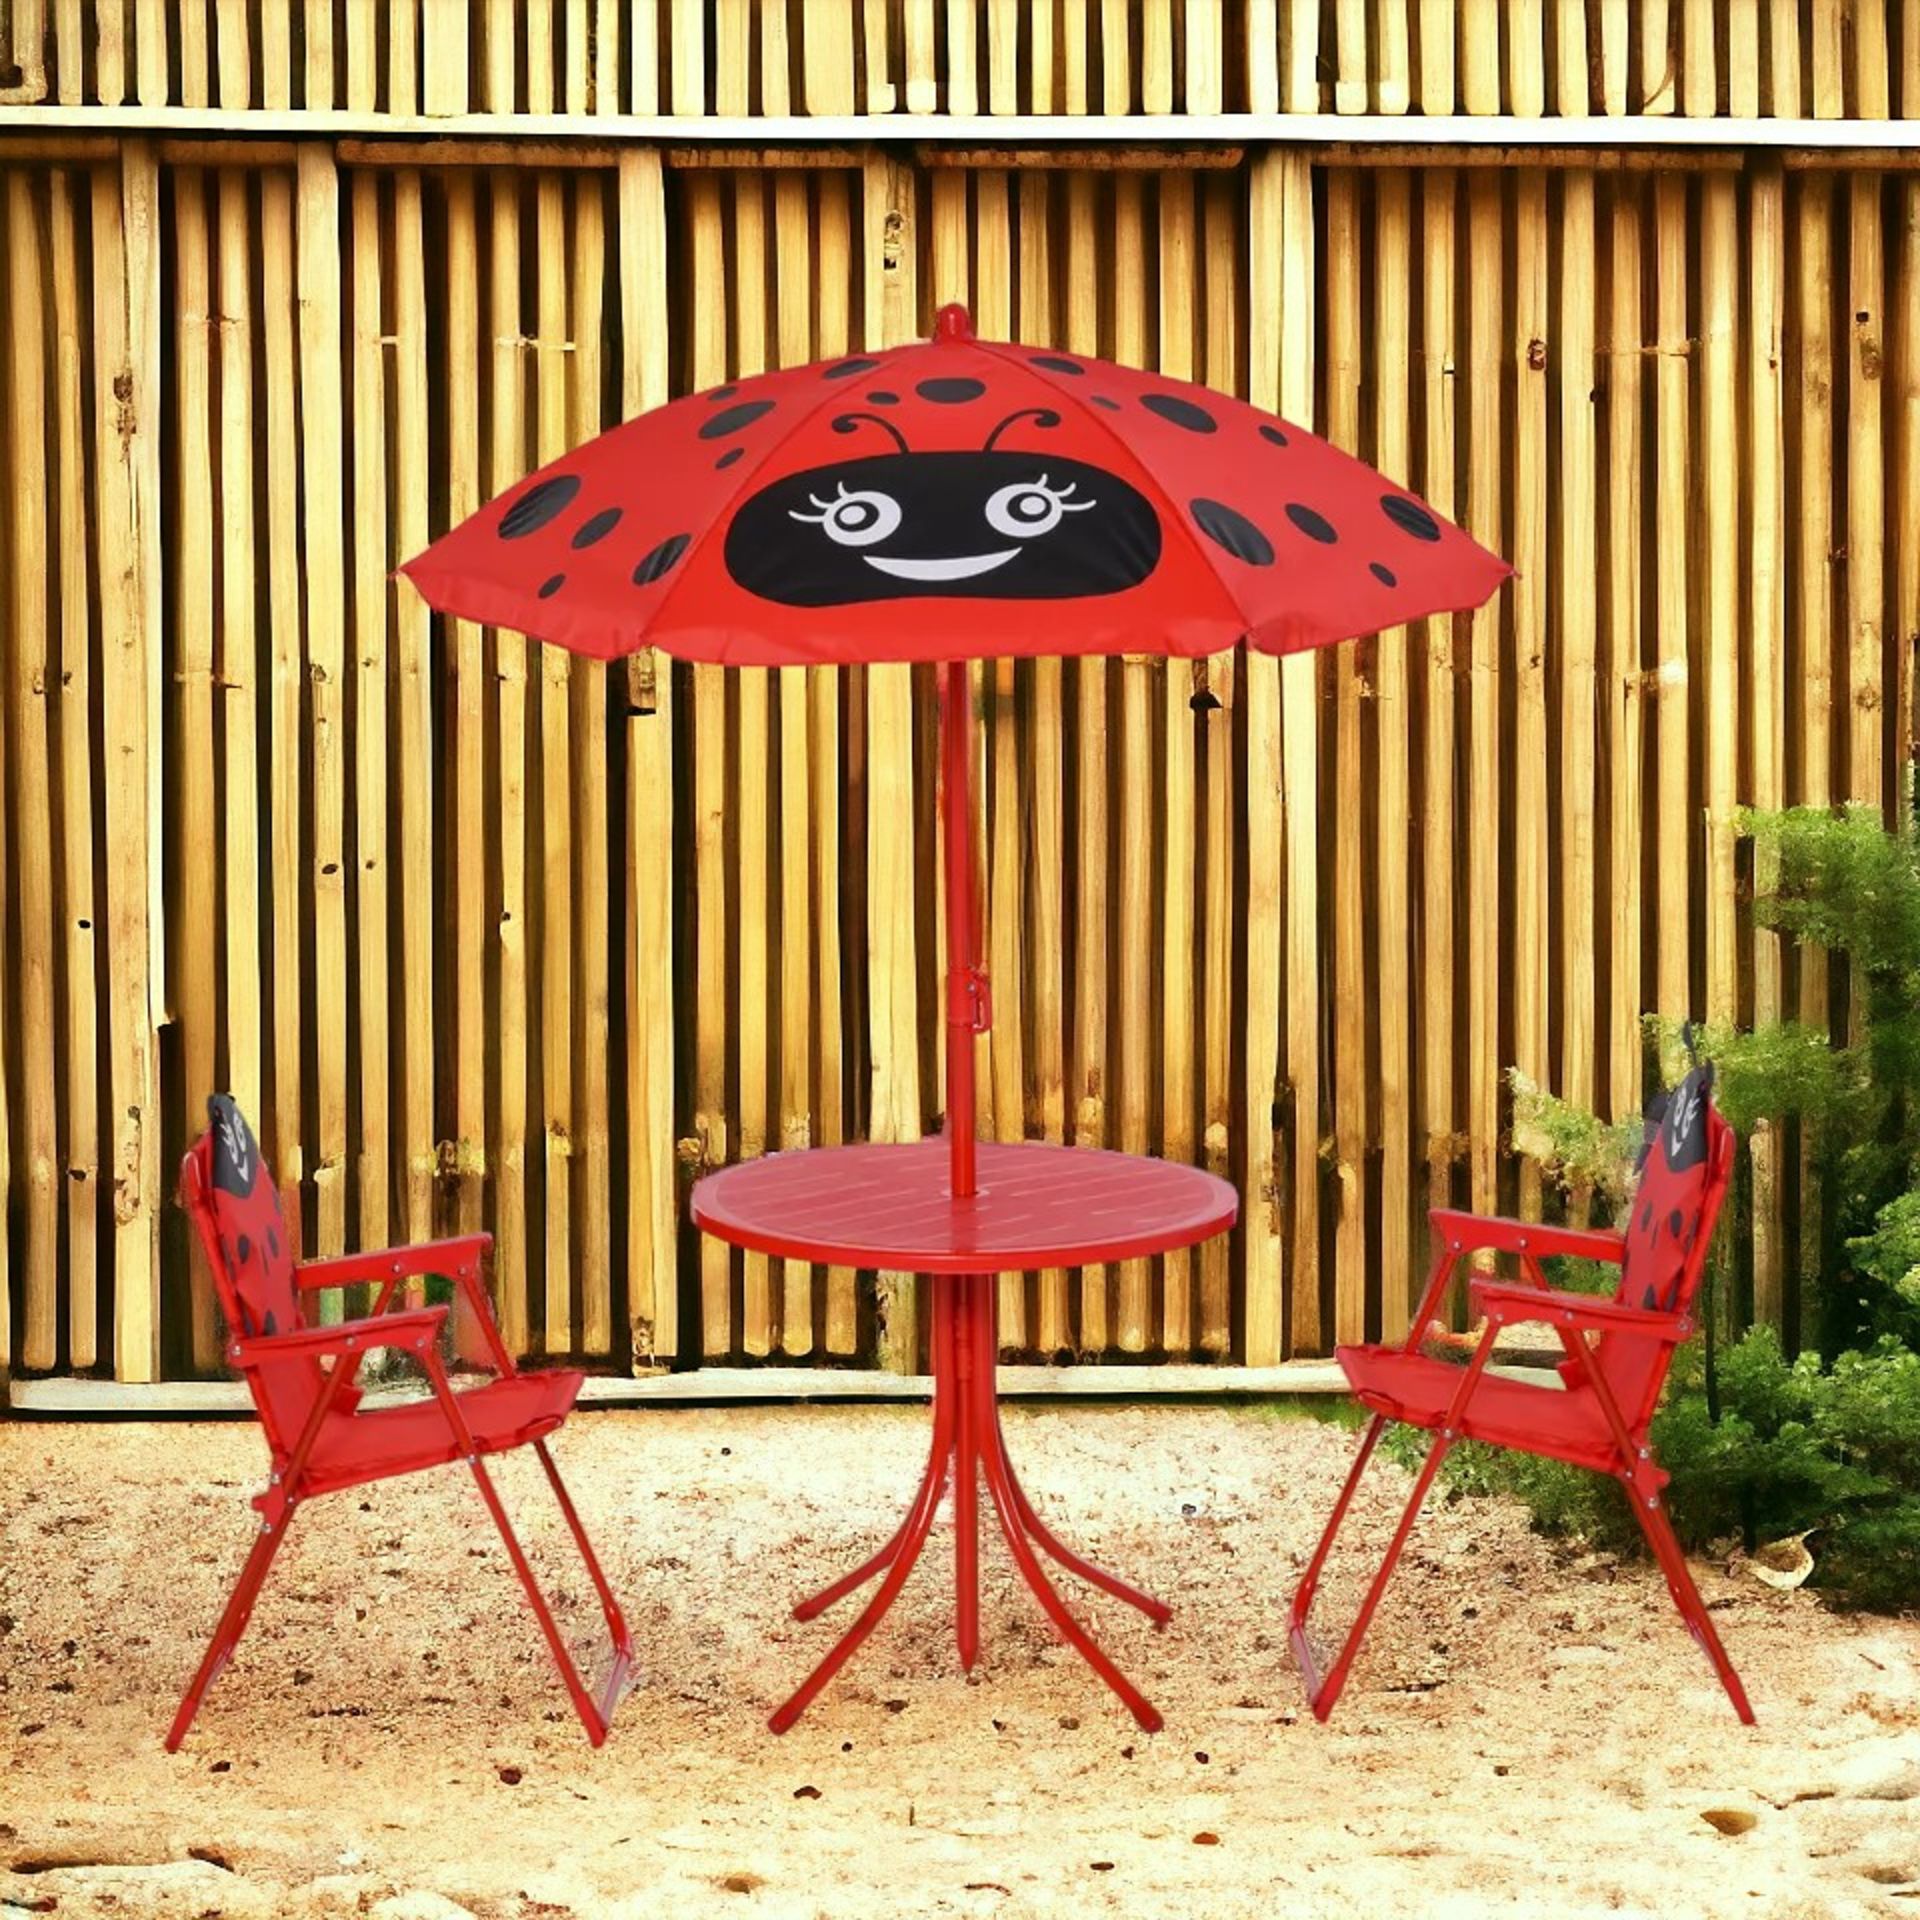 FREE DELIVERY- BRAND NEW KIDS FOLDING PICNIC TABLE CHAIR SET LADYBUG PATTERN OUTDOOR - Image 2 of 2